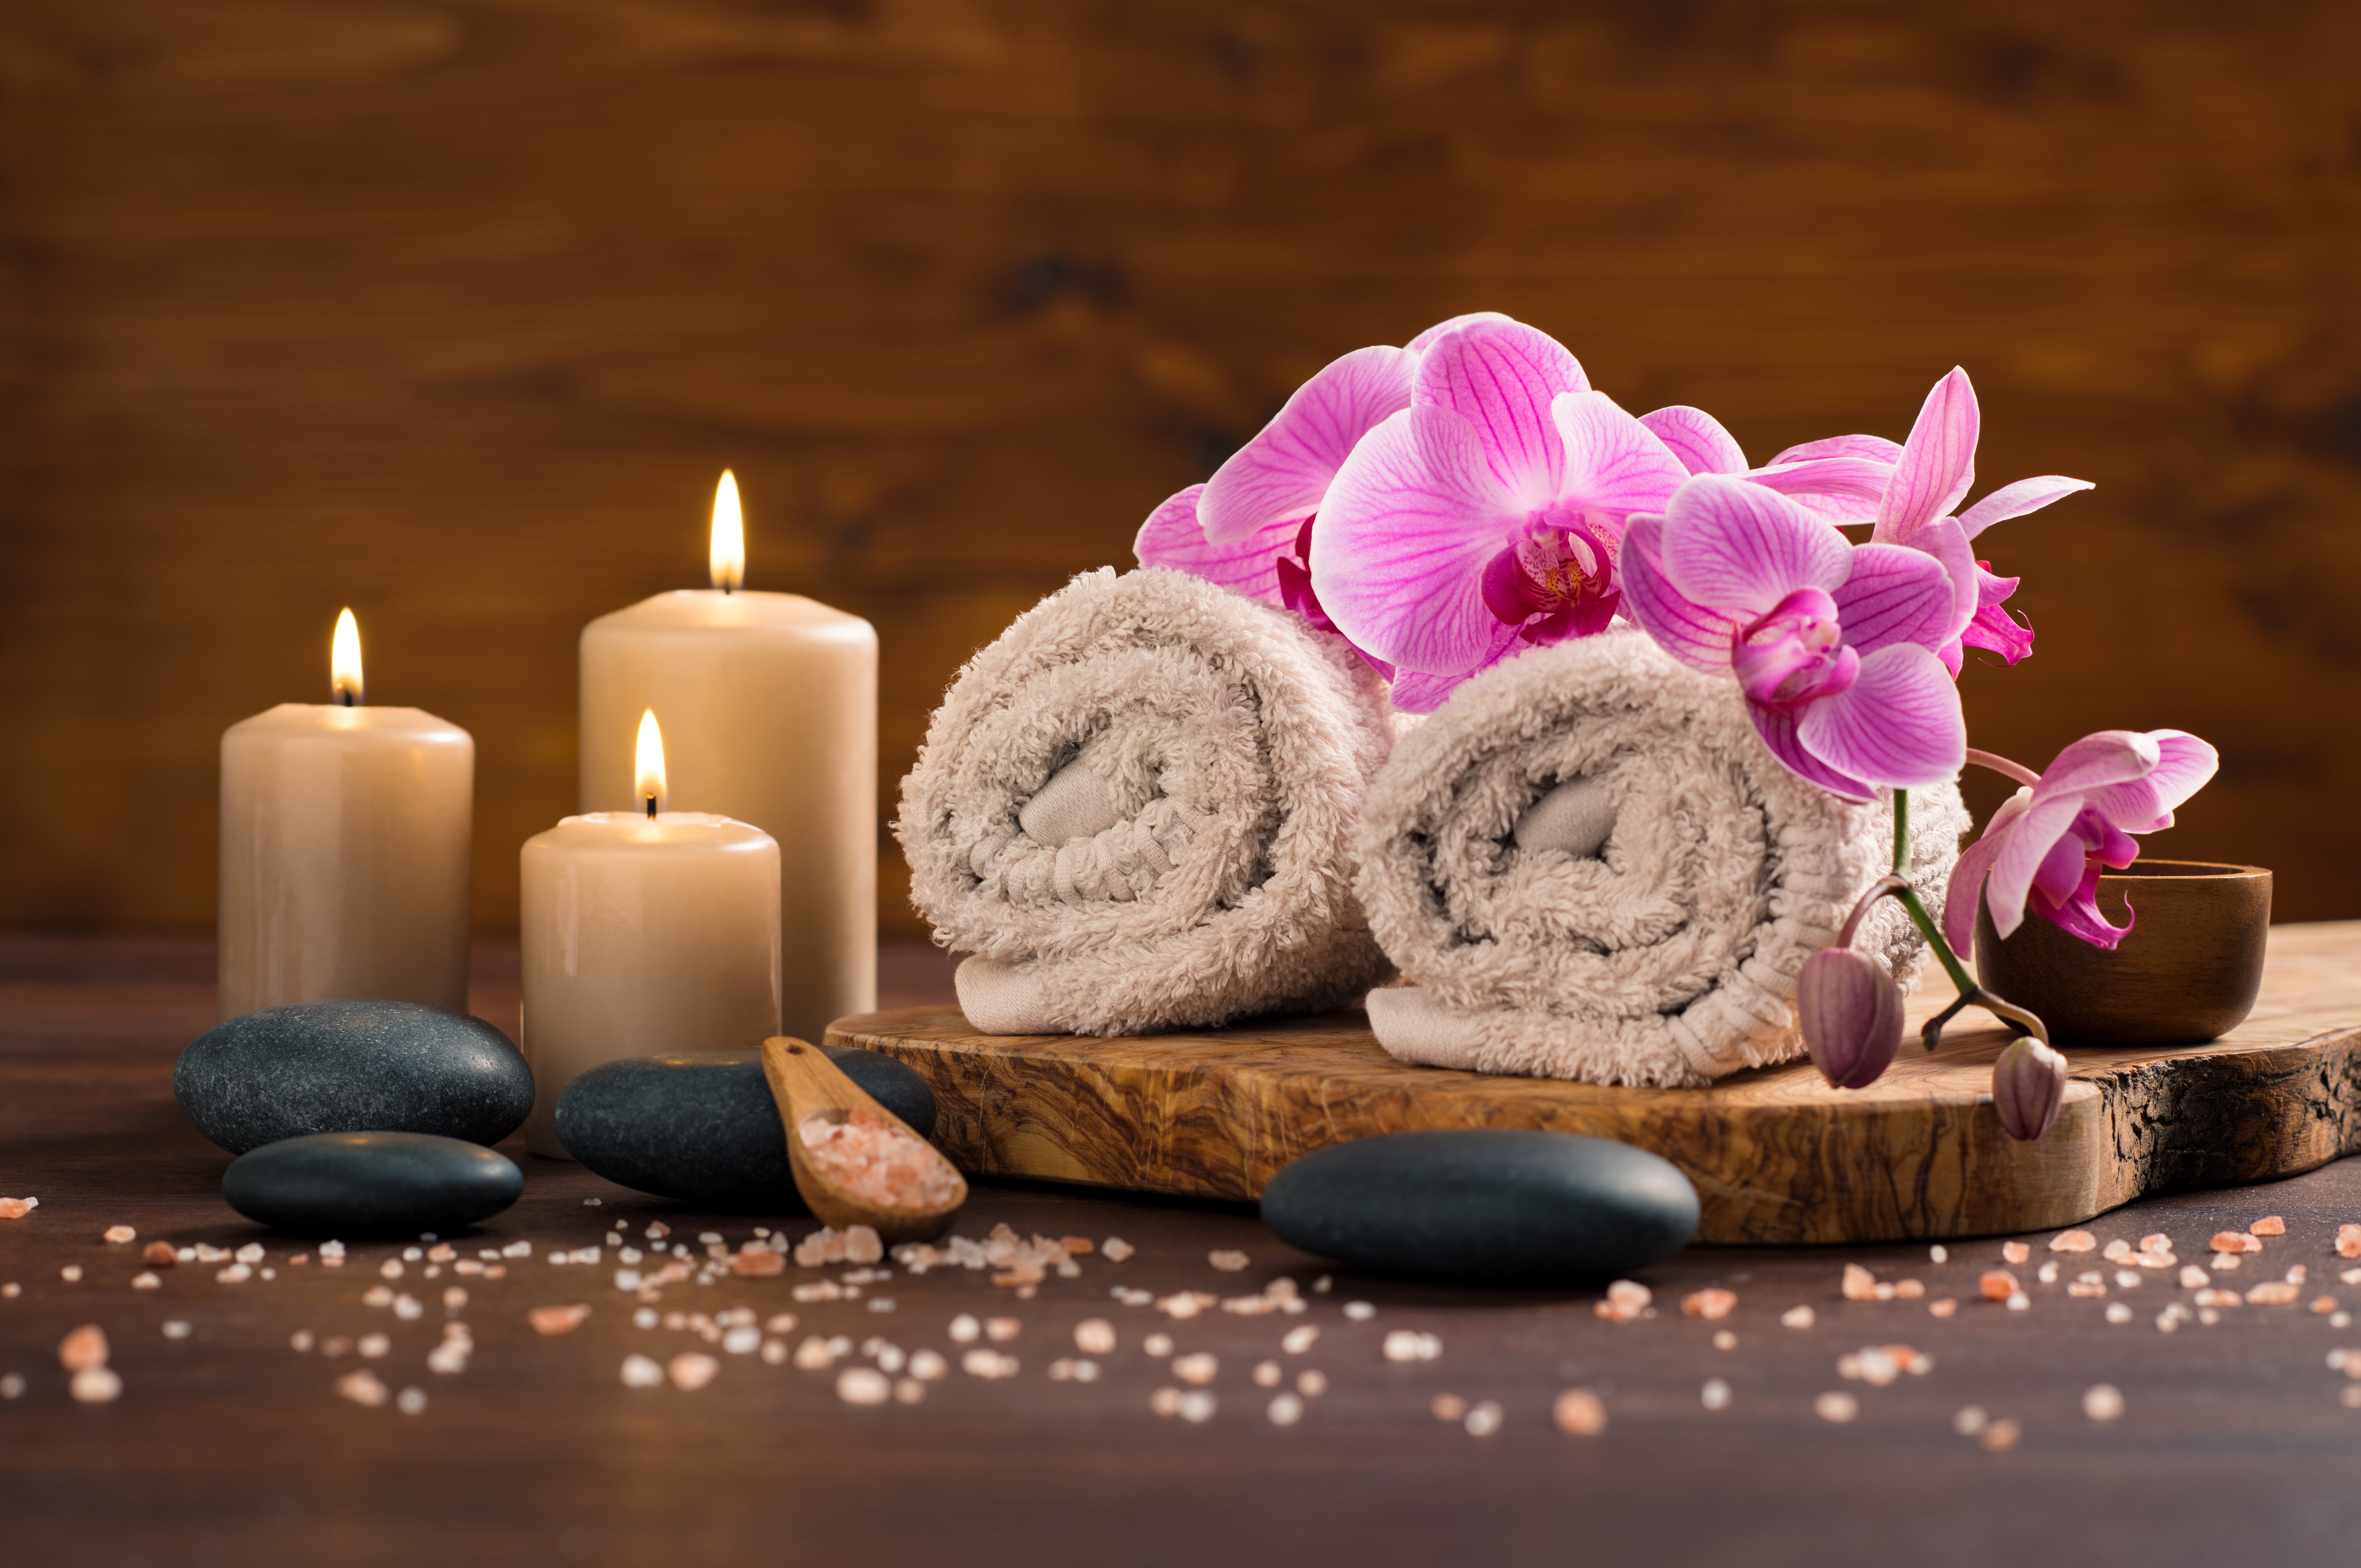 orchid, man made, spa, candle, flower, pink flower, towel